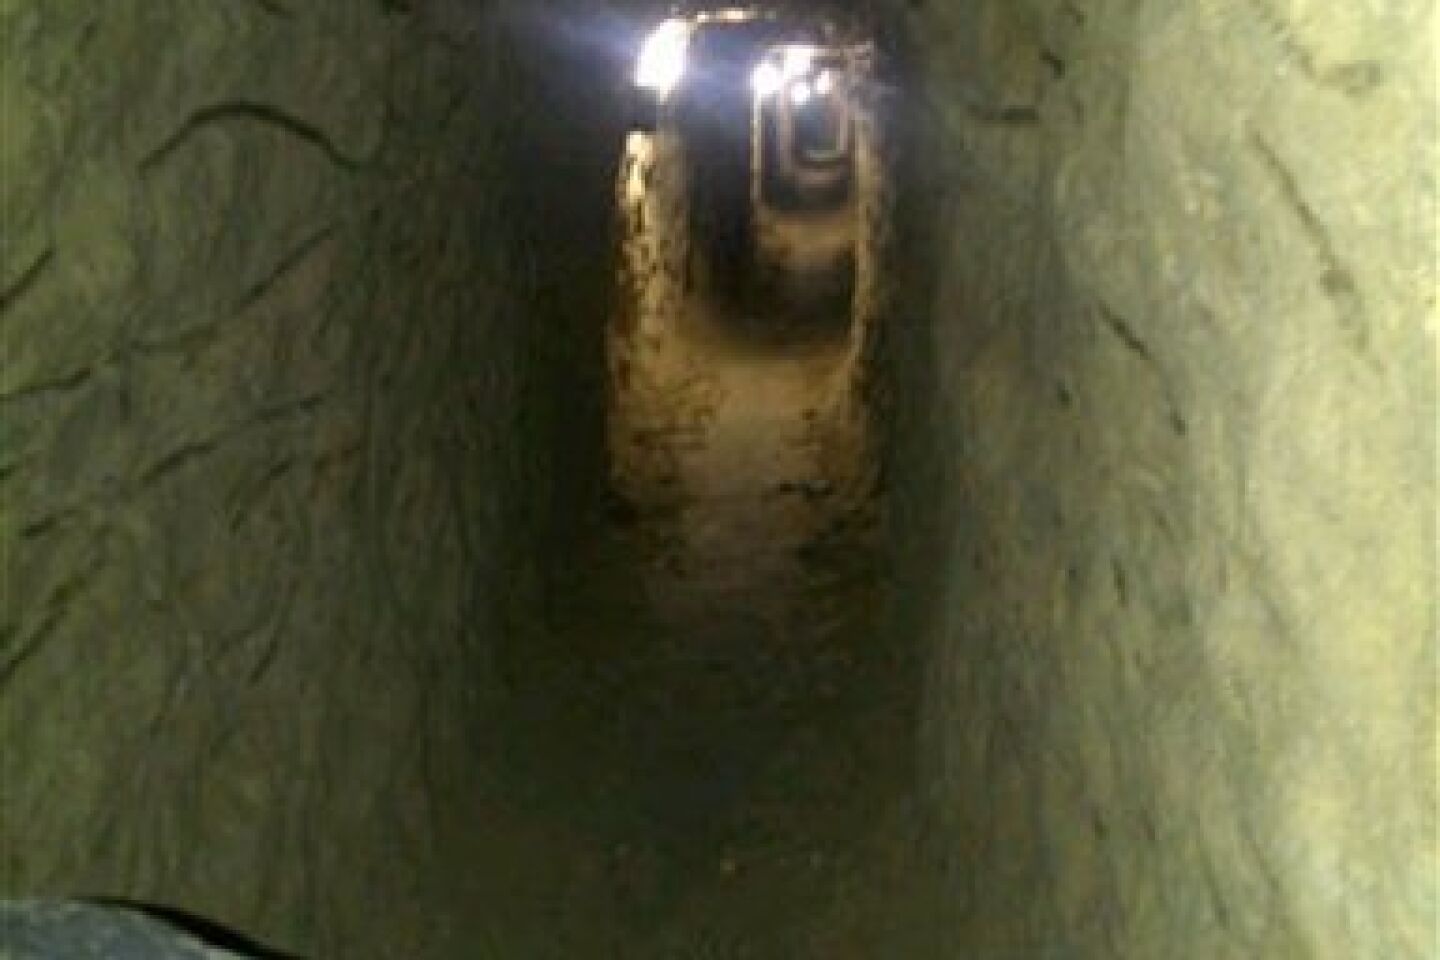 This image provided Thursday July 12, 2012, by the U.S. Immigration and Customs Enforcement shows a tunnel discovered by authorities designed to smuggle drugs into the United States, found in Tijuana, Mexico. An Immigration and Customs Enforcement spokeswoman said Thursday that the approximately 22